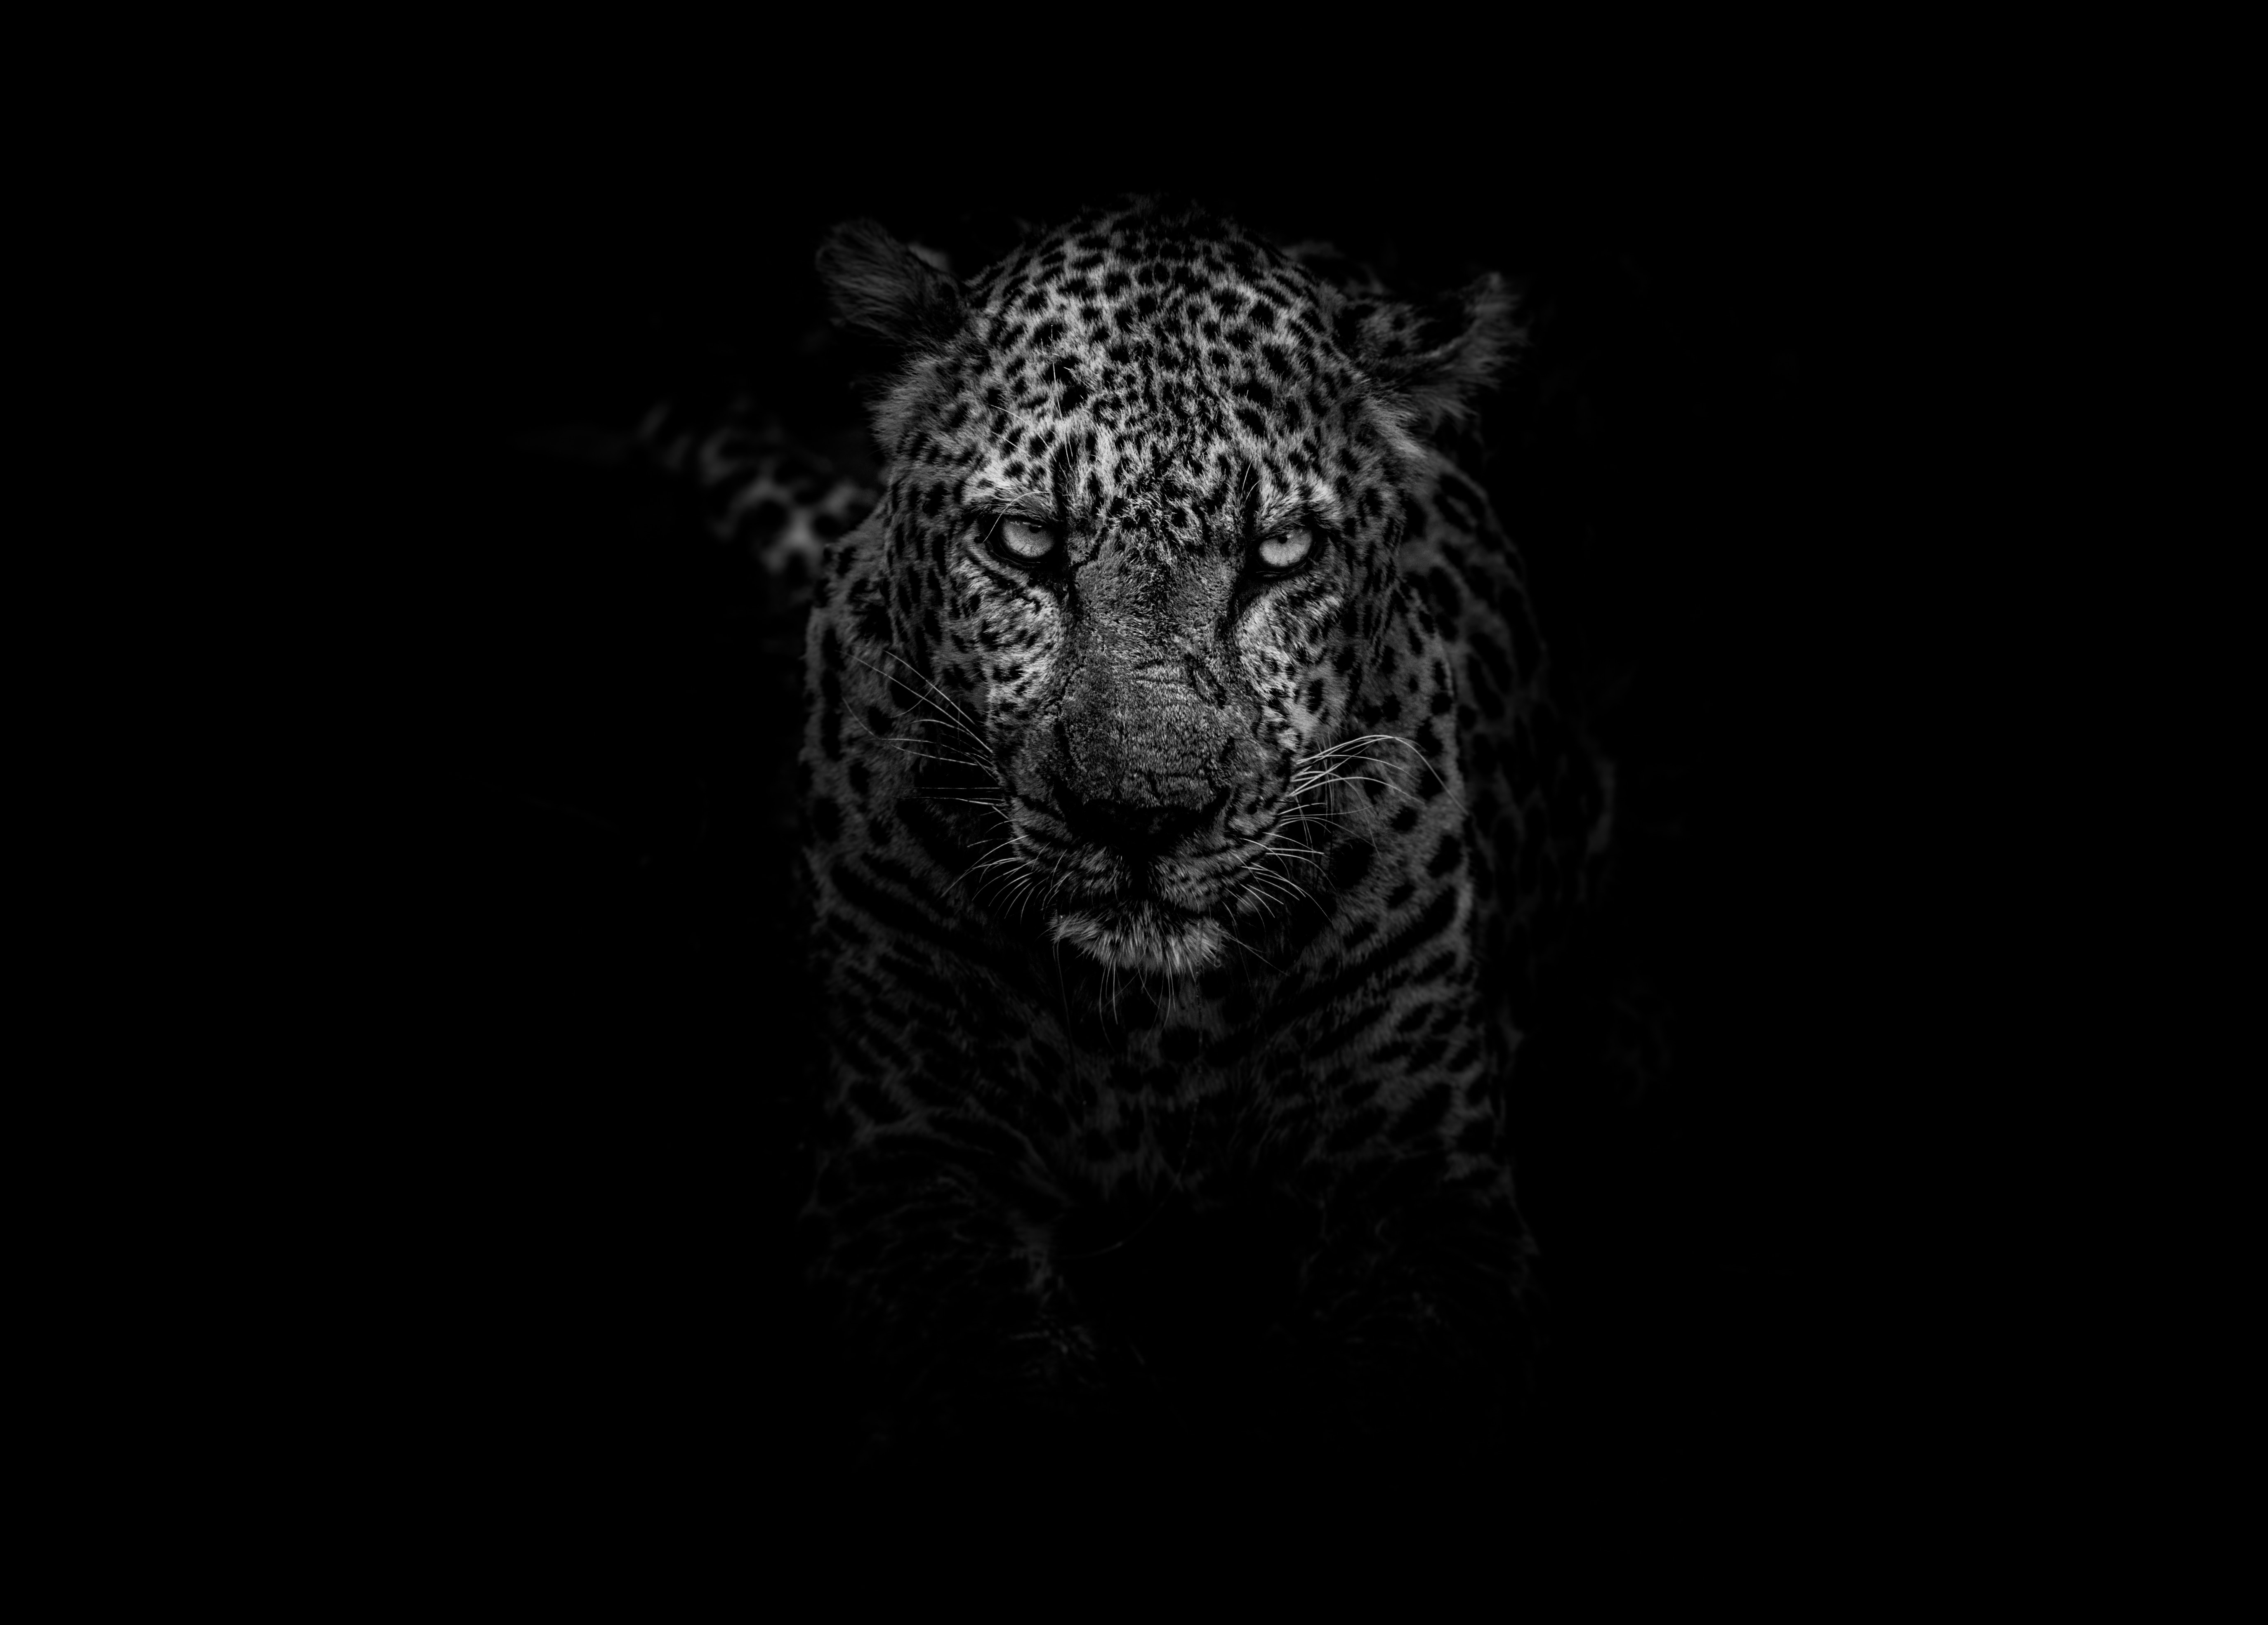 Leopard Dark Monochrome 5k, HD Animals, 4k Wallpapers, Images, Backgrounds,  Photos and Pictures